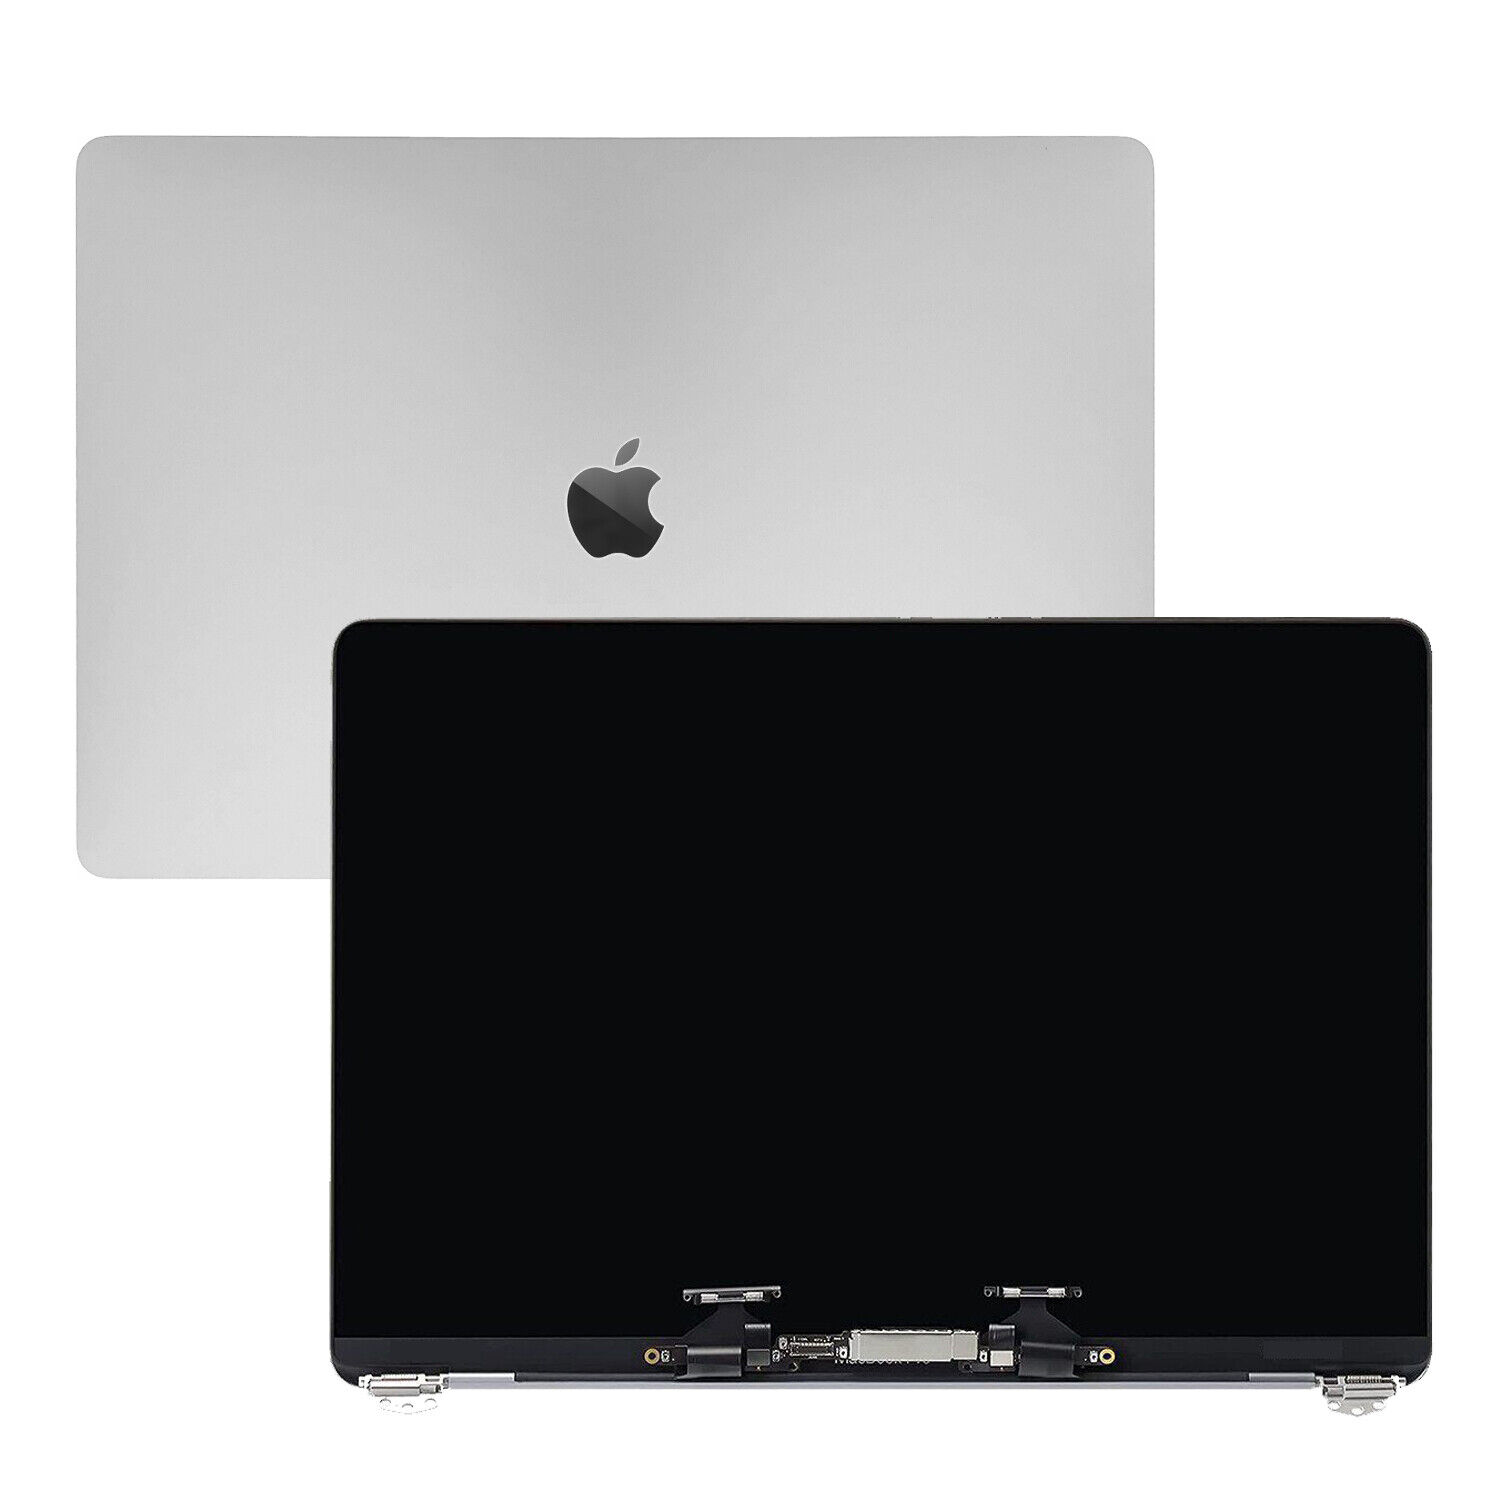 A+ NEW For Apple MacBook Pro A1989 A2159 A2289 A2251 LCD Screen Display Assembly